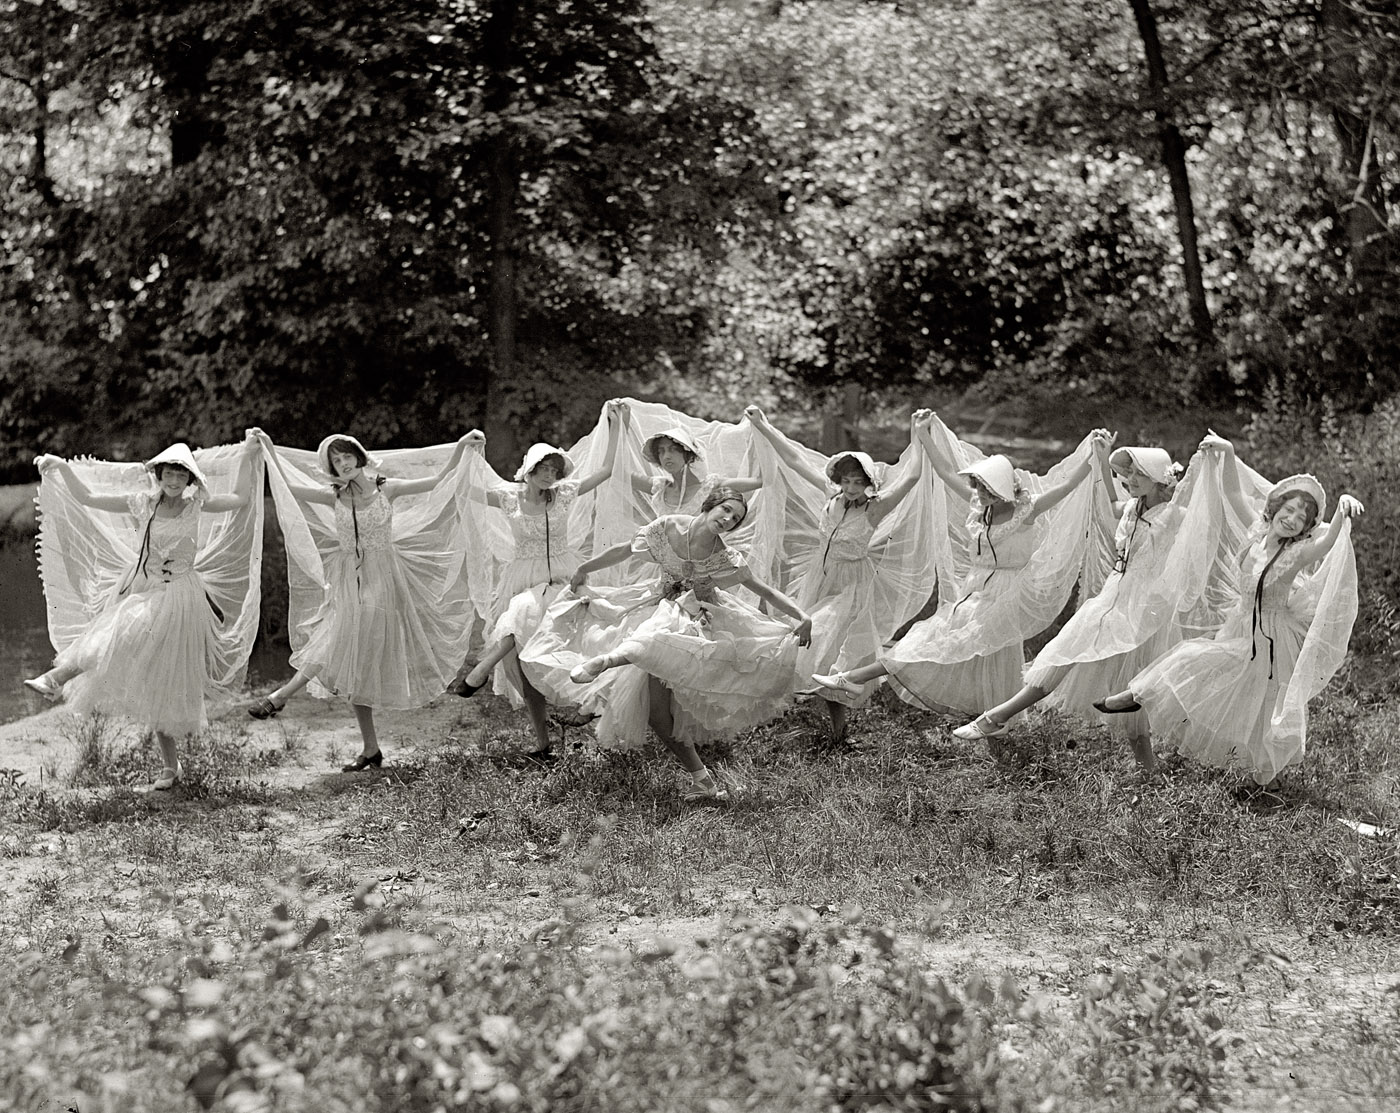 June 30, 1925. "National American Ballet." National Photo Company Collection glass negative, Library of Congress. View full size.